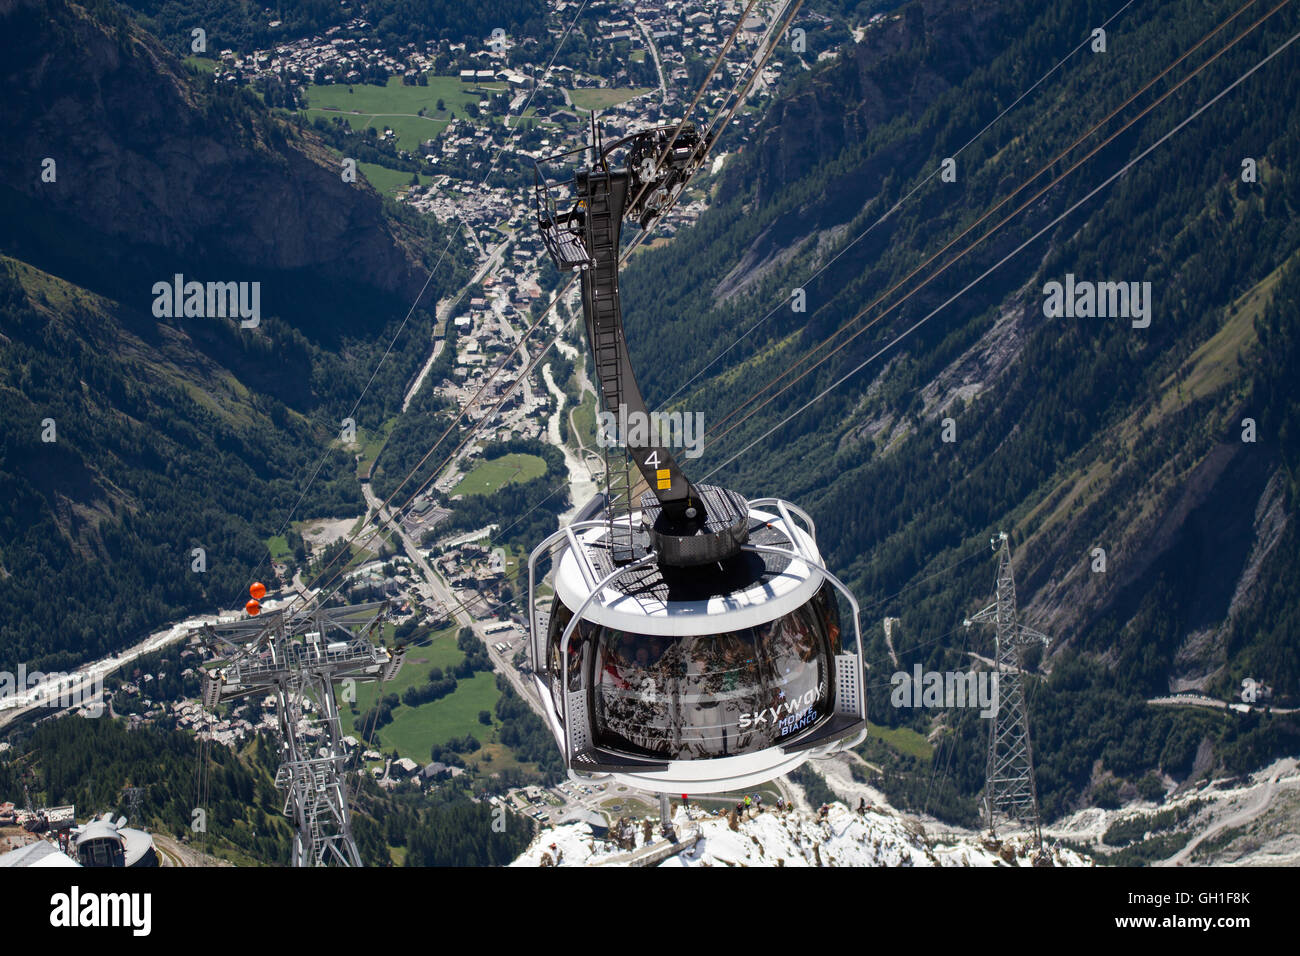 A car of the Skyway Monte Bianco ascends the 3,462 metre high Pointe Helbronner, a peak that is a part of Mont Blanc mountain range in Courmayeur, Italy, 06 August 2016. Photo: Silas Stein/dpa Stock Photo